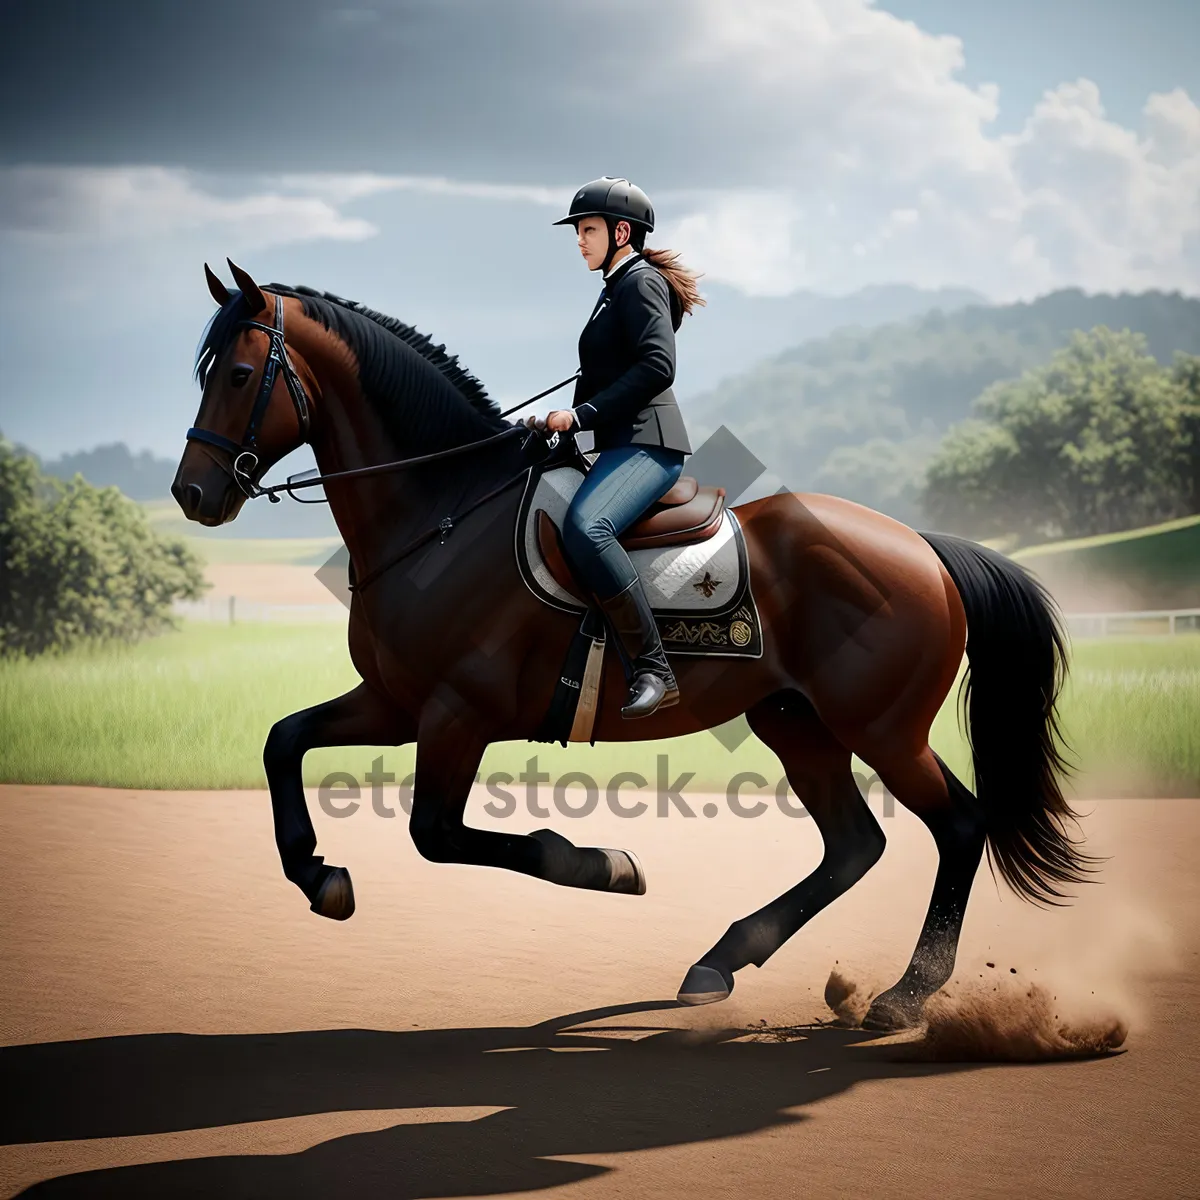 Picture of Equestrian Rider on Thoroughbred Stallion in Competition.